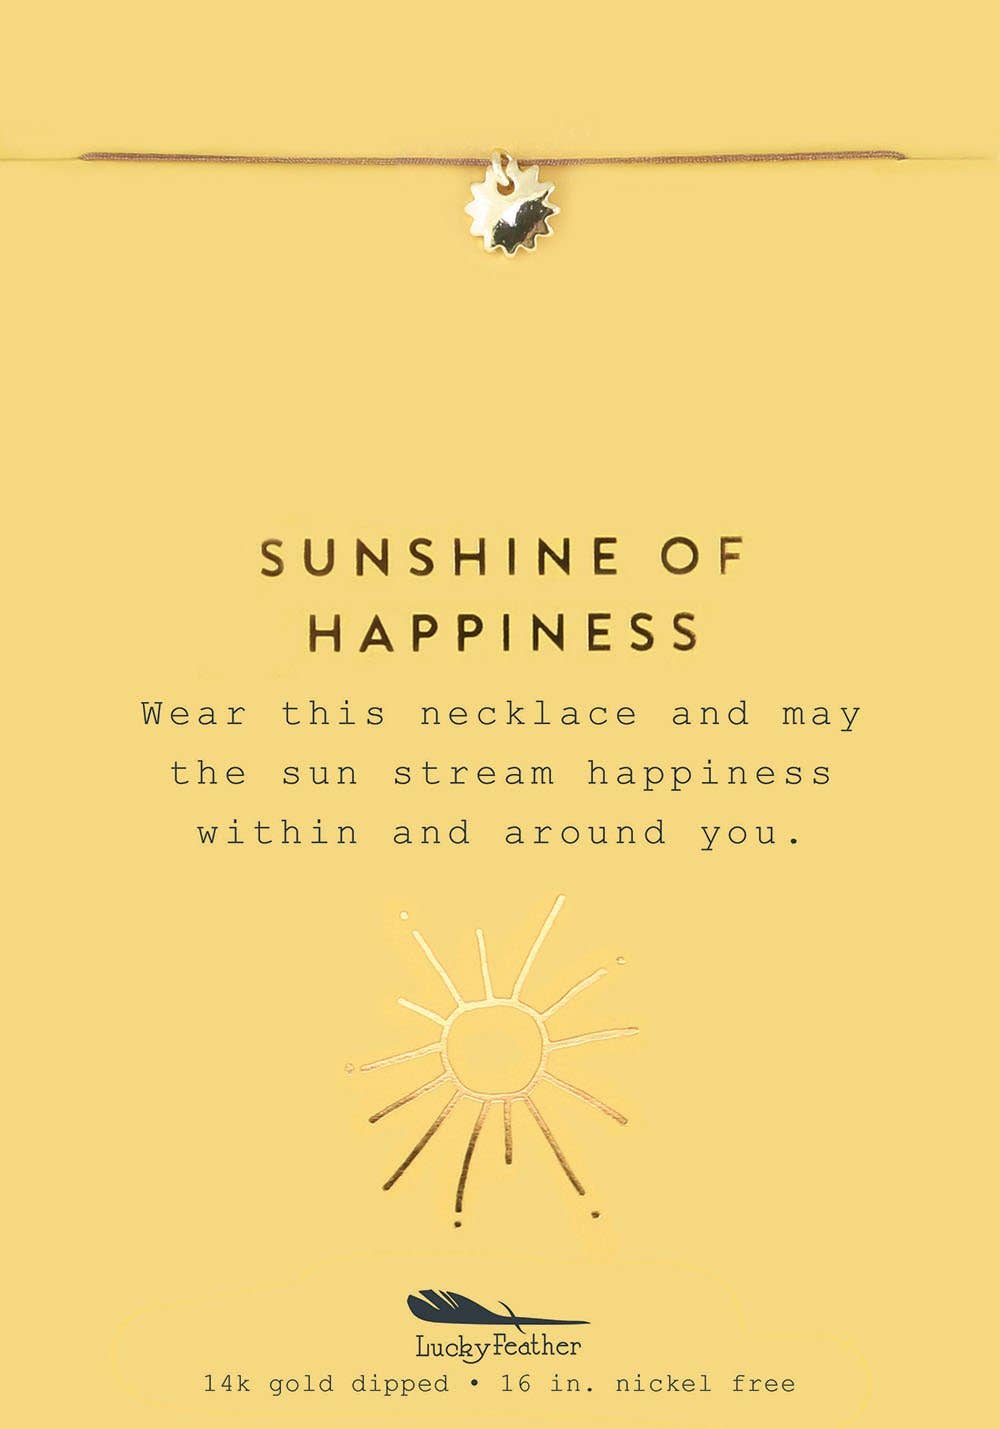 Sunshine of Happiness - New Moon Gold Necklace